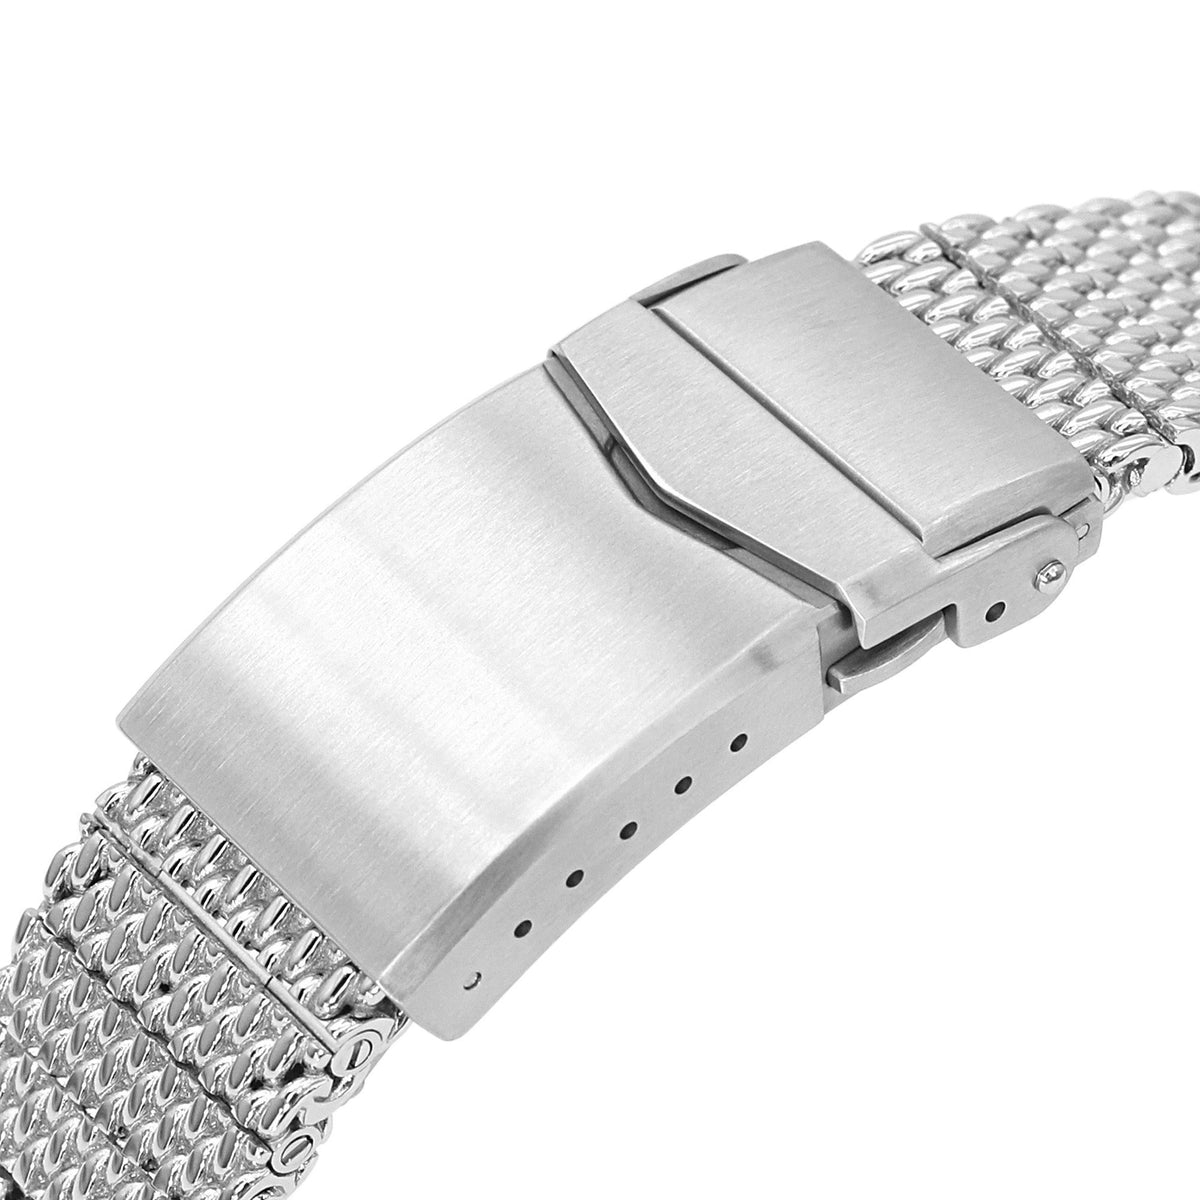 Wristband stainless steel 18mm mesh robust Butterfly clasp by Staib